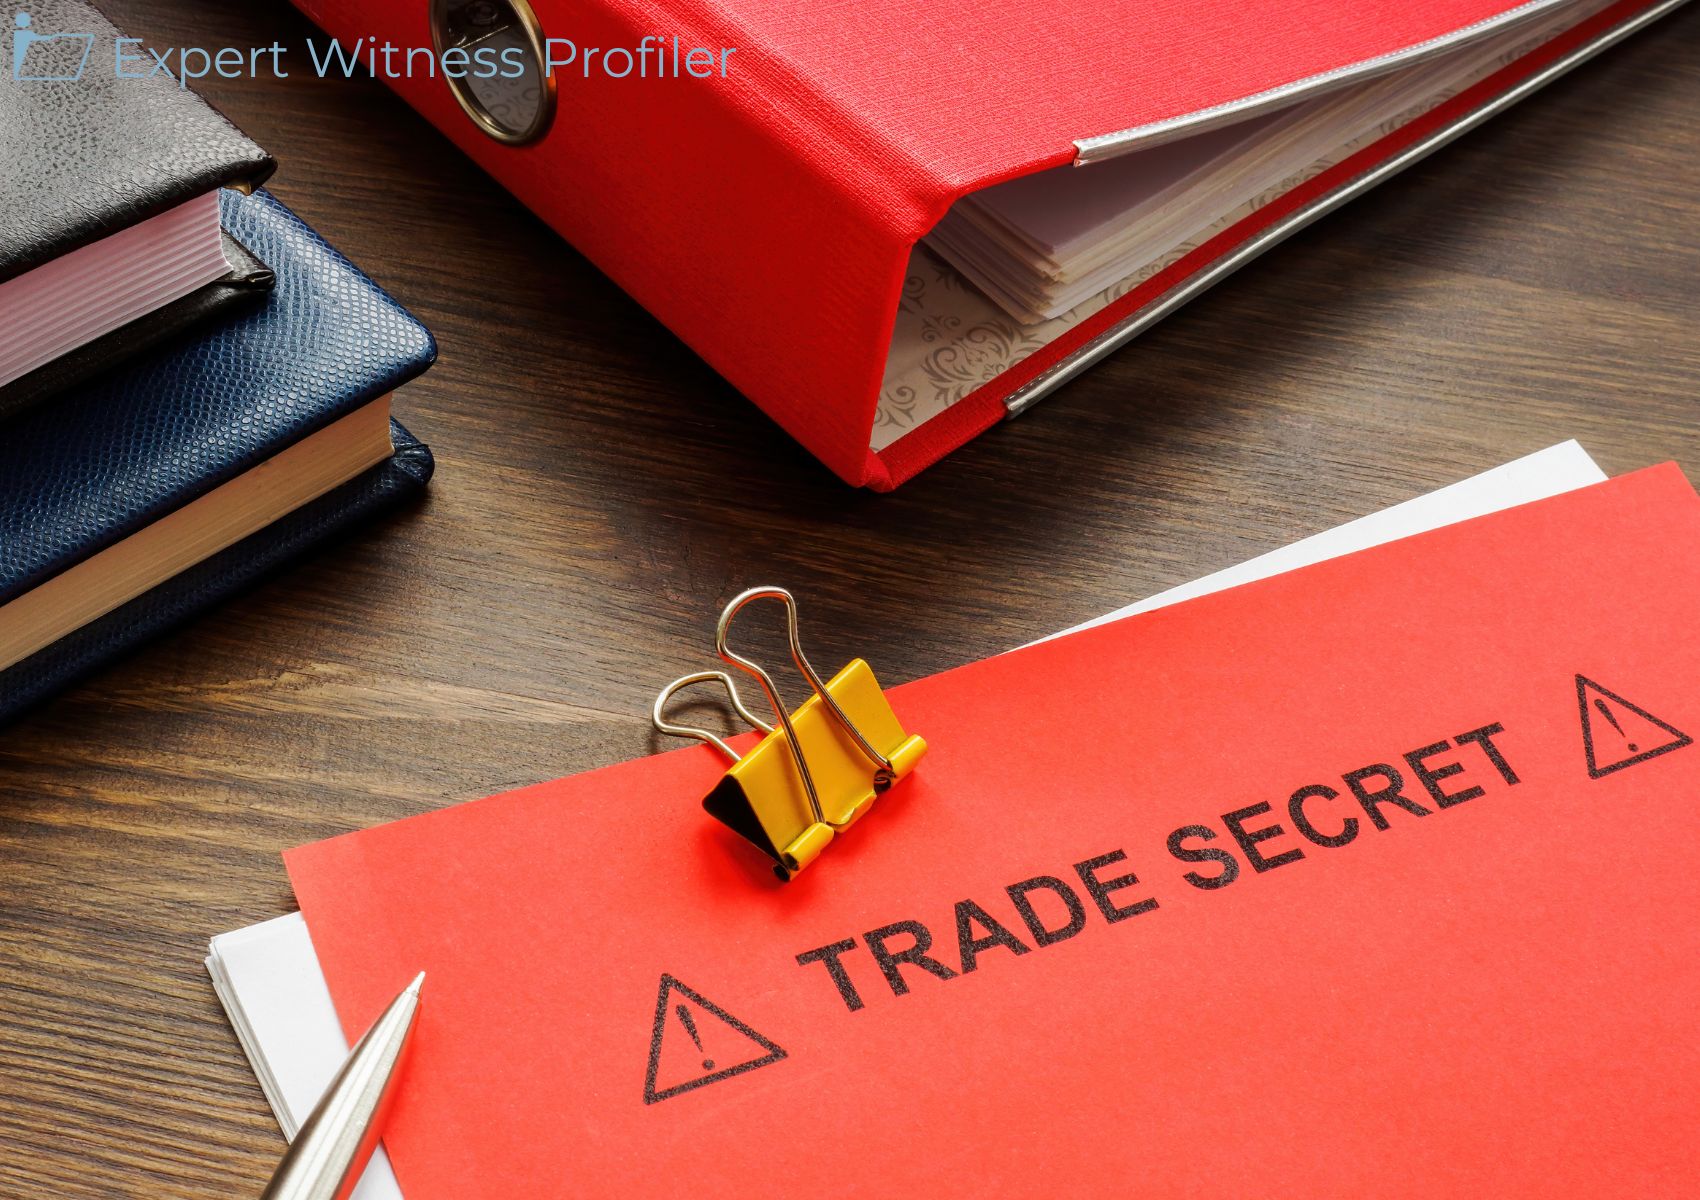 Trade Secrets Expert Witness' Testimony Based on his own Experience Admitted